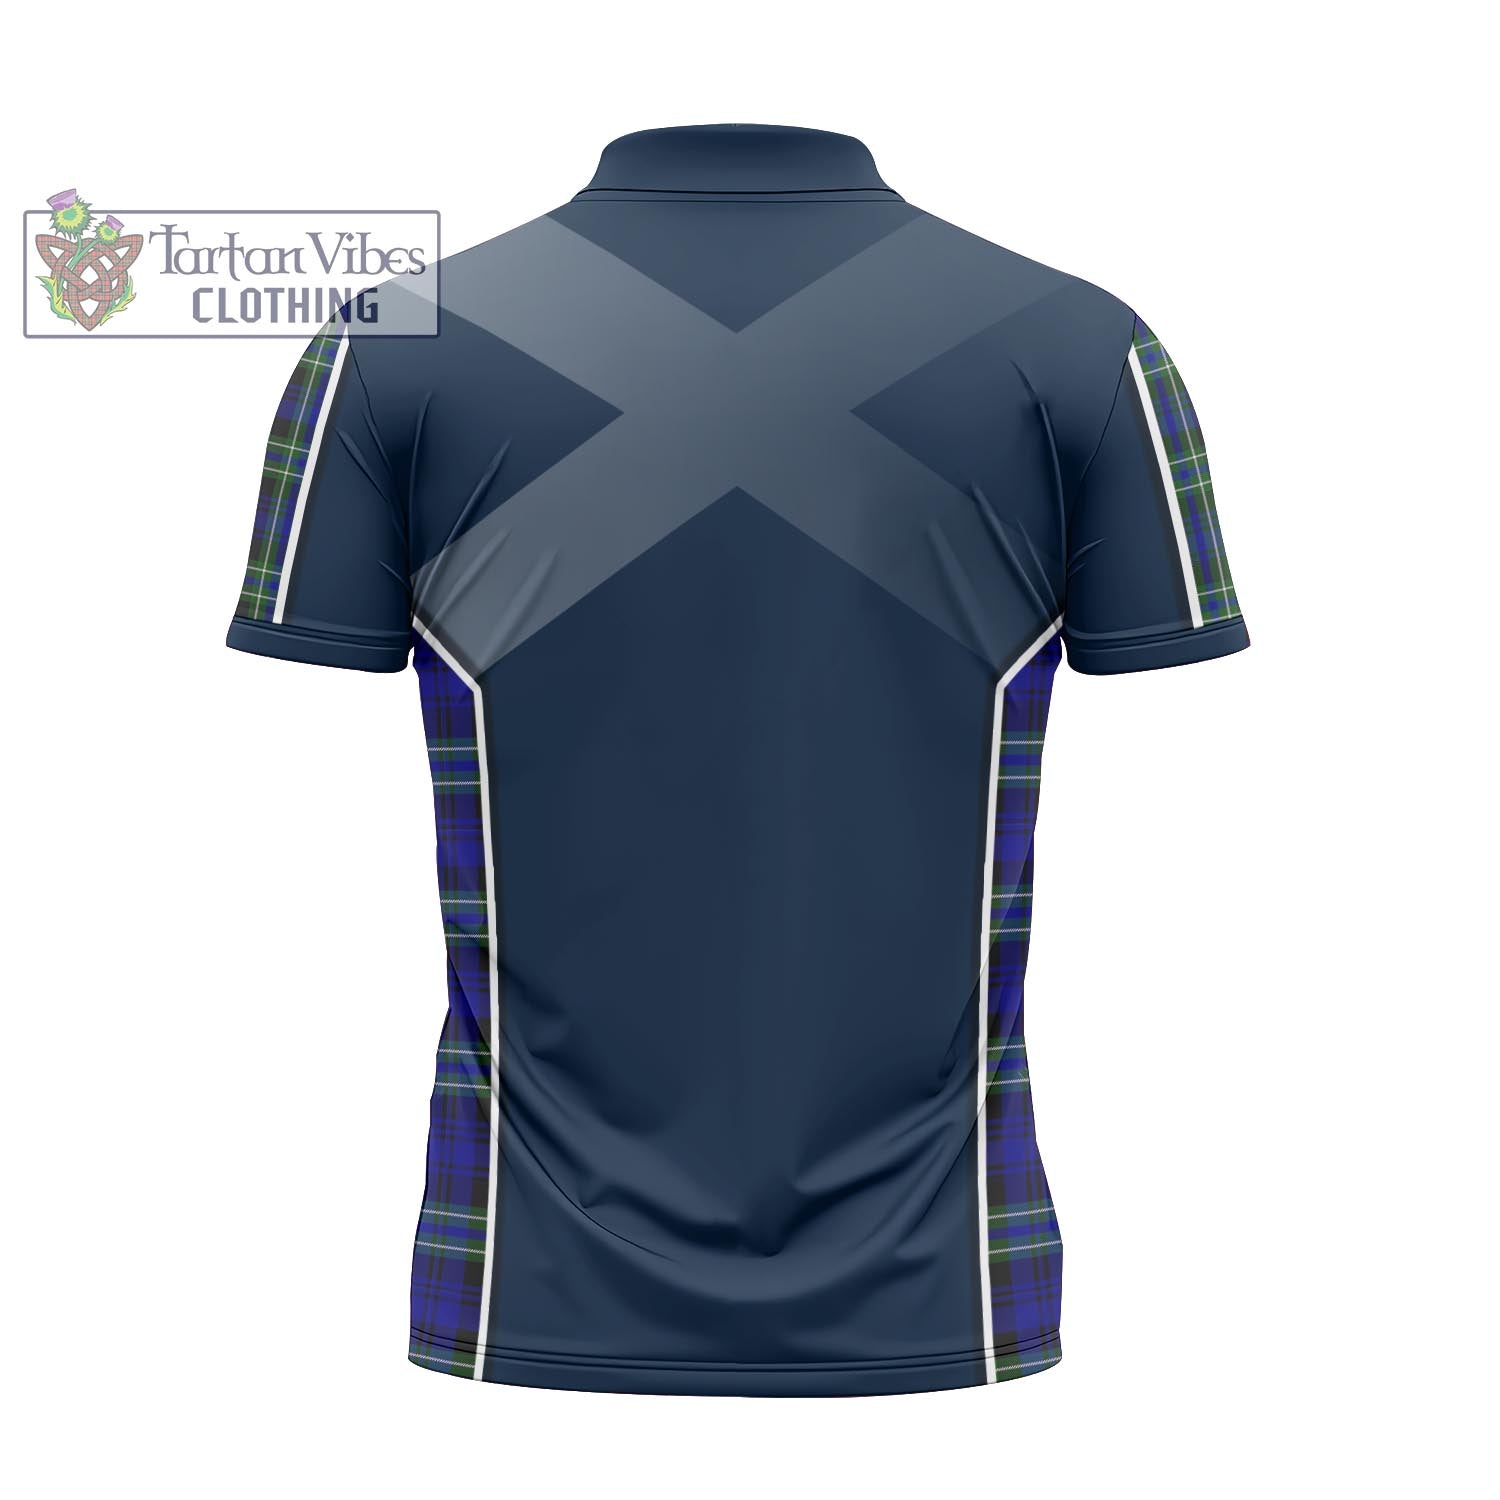 Tartan Vibes Clothing Arbuthnot Modern Tartan Zipper Polo Shirt with Family Crest and Scottish Thistle Vibes Sport Style